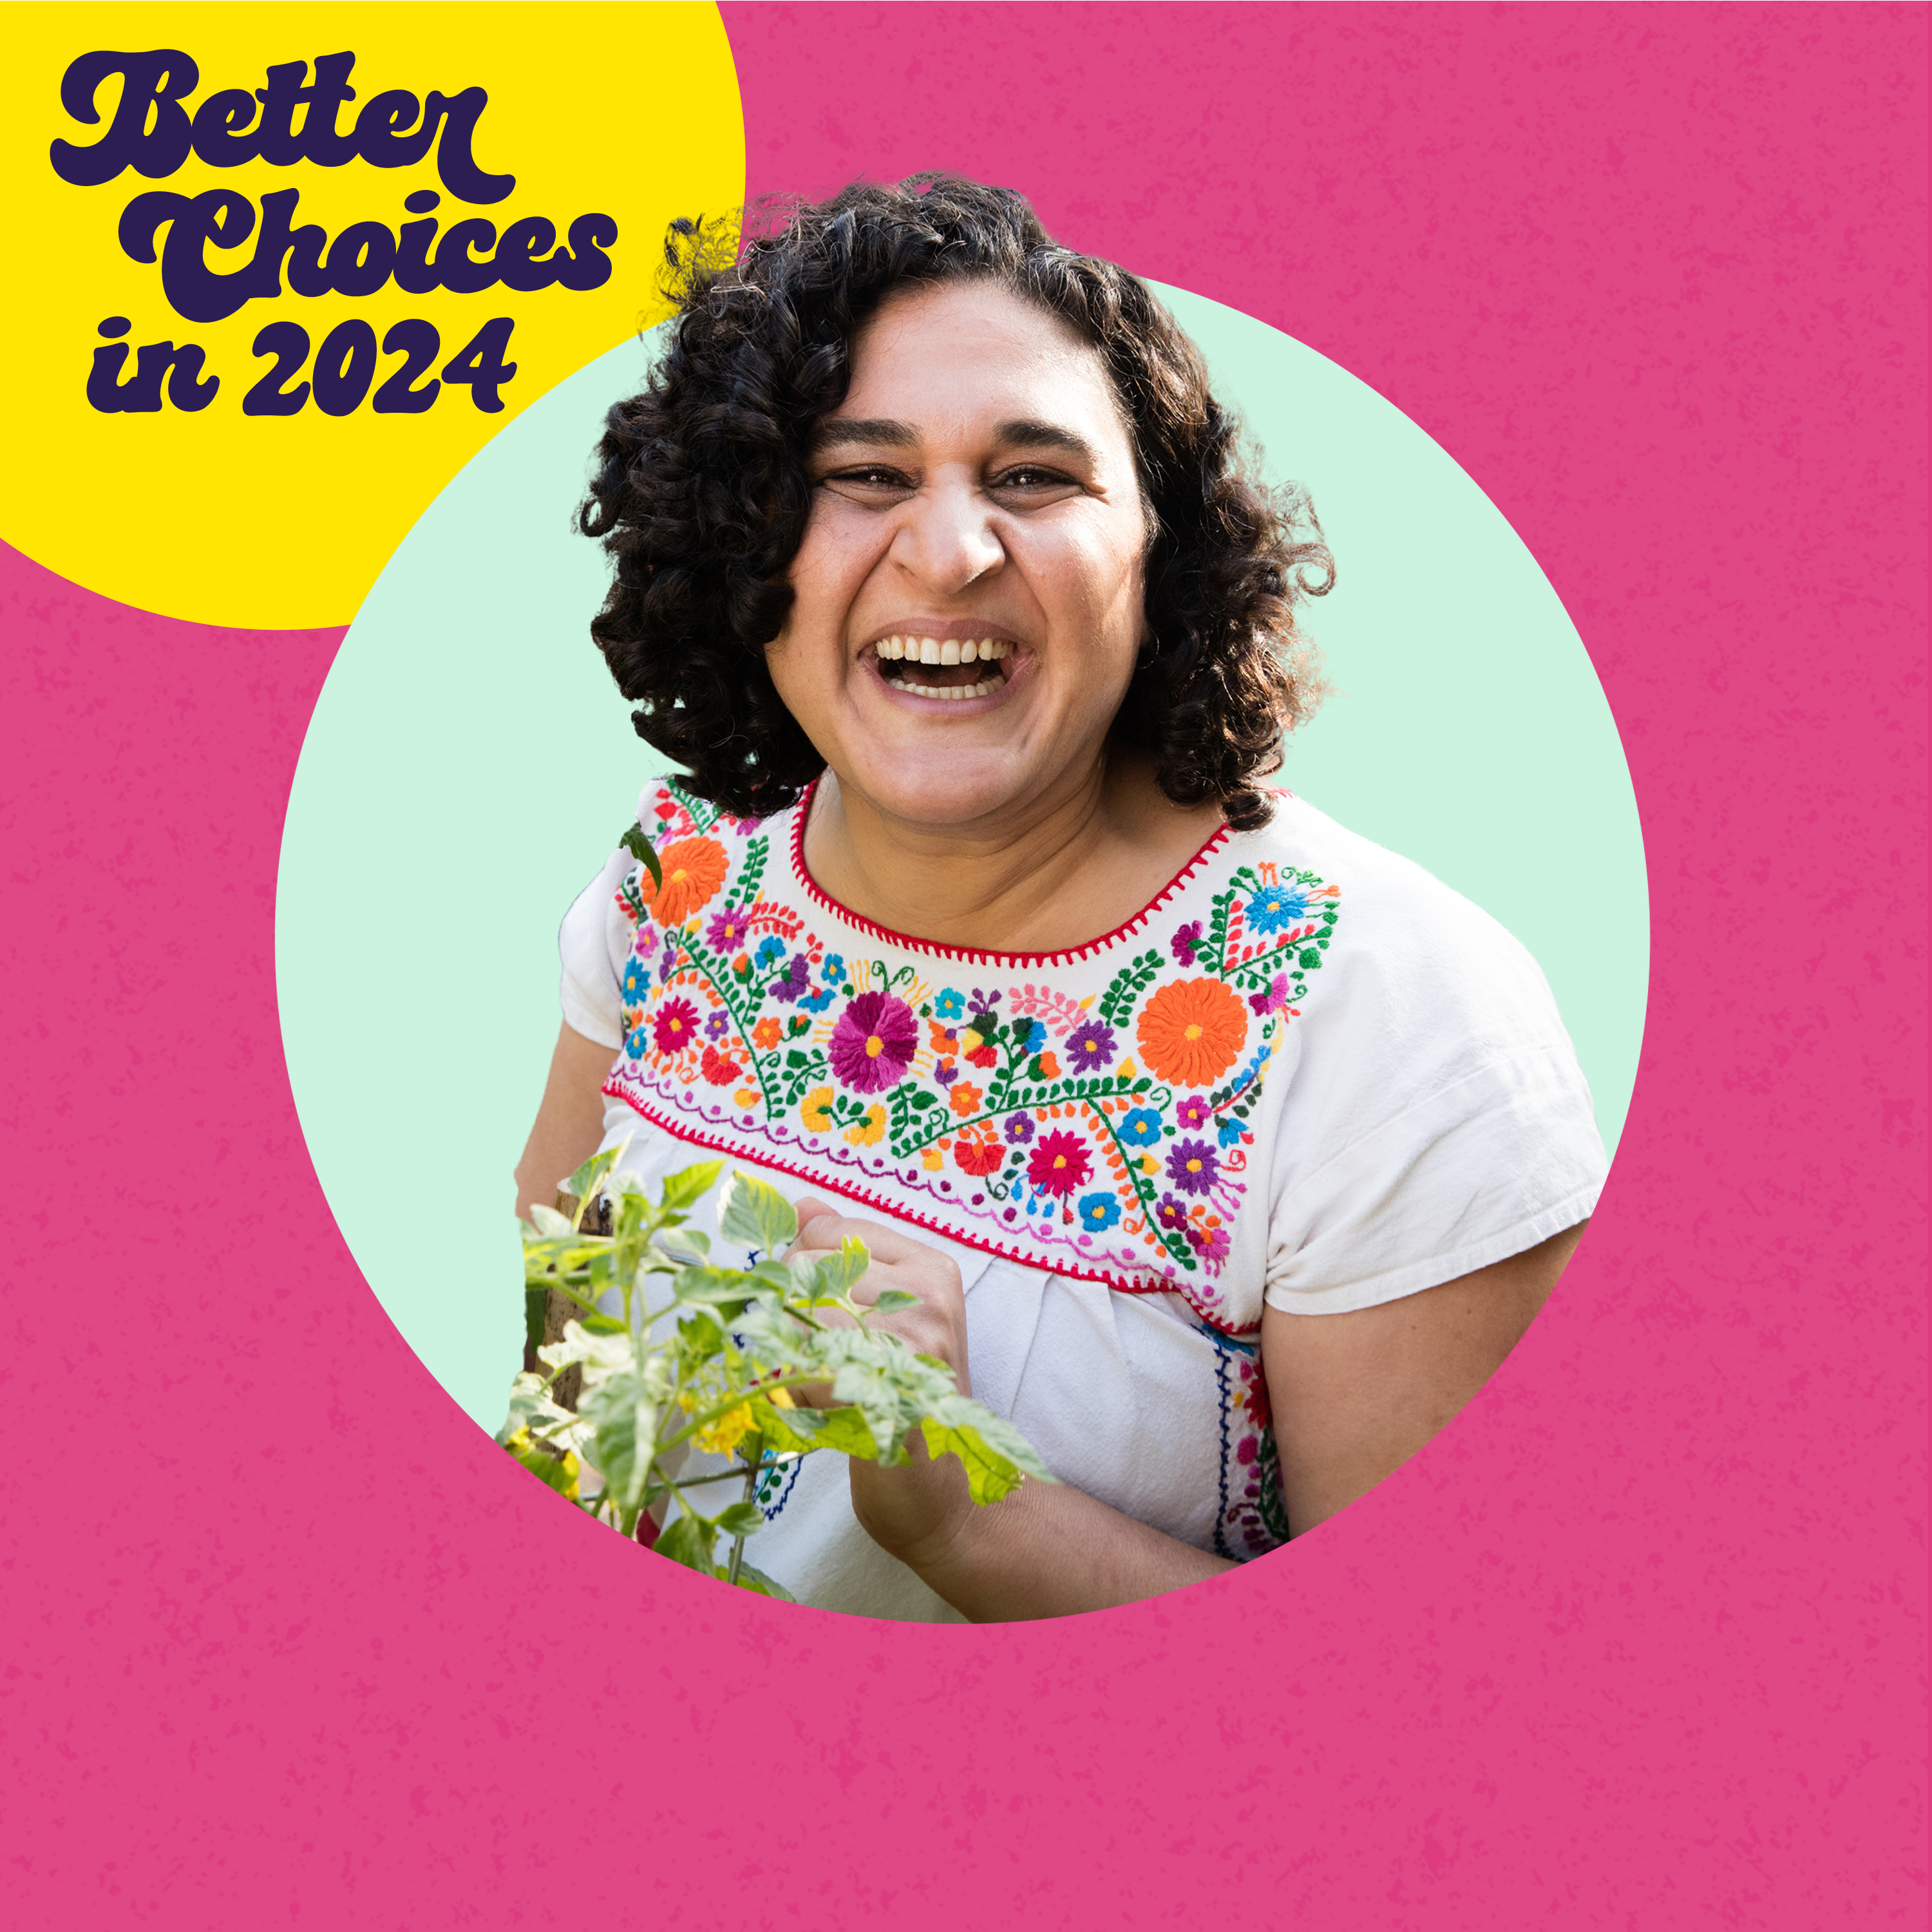 Better Choices in 2024: Sunday Supper or Taco Tuesday? (with Samin Nosrat)